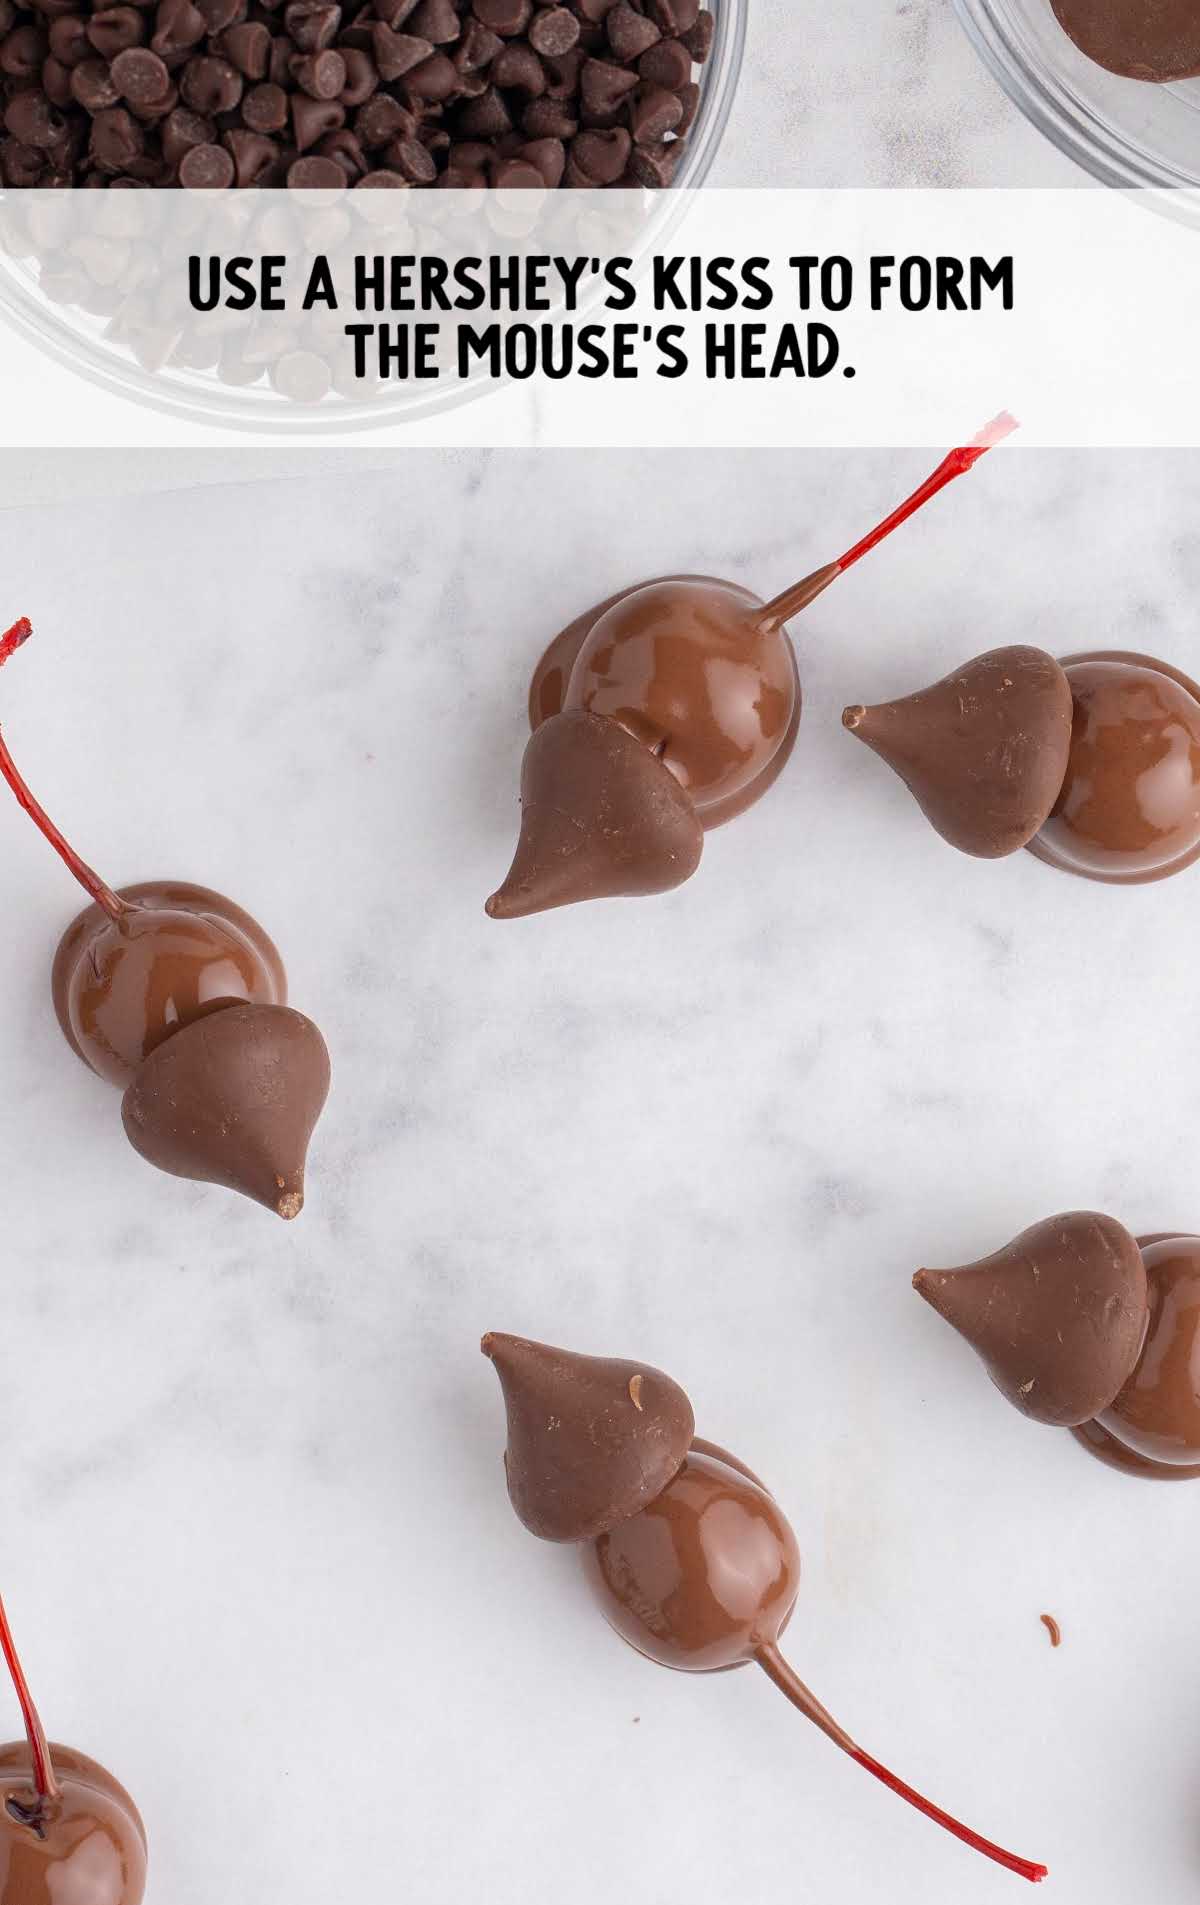 Hershey's kisses placed on top of the chocolate-dipped cherries